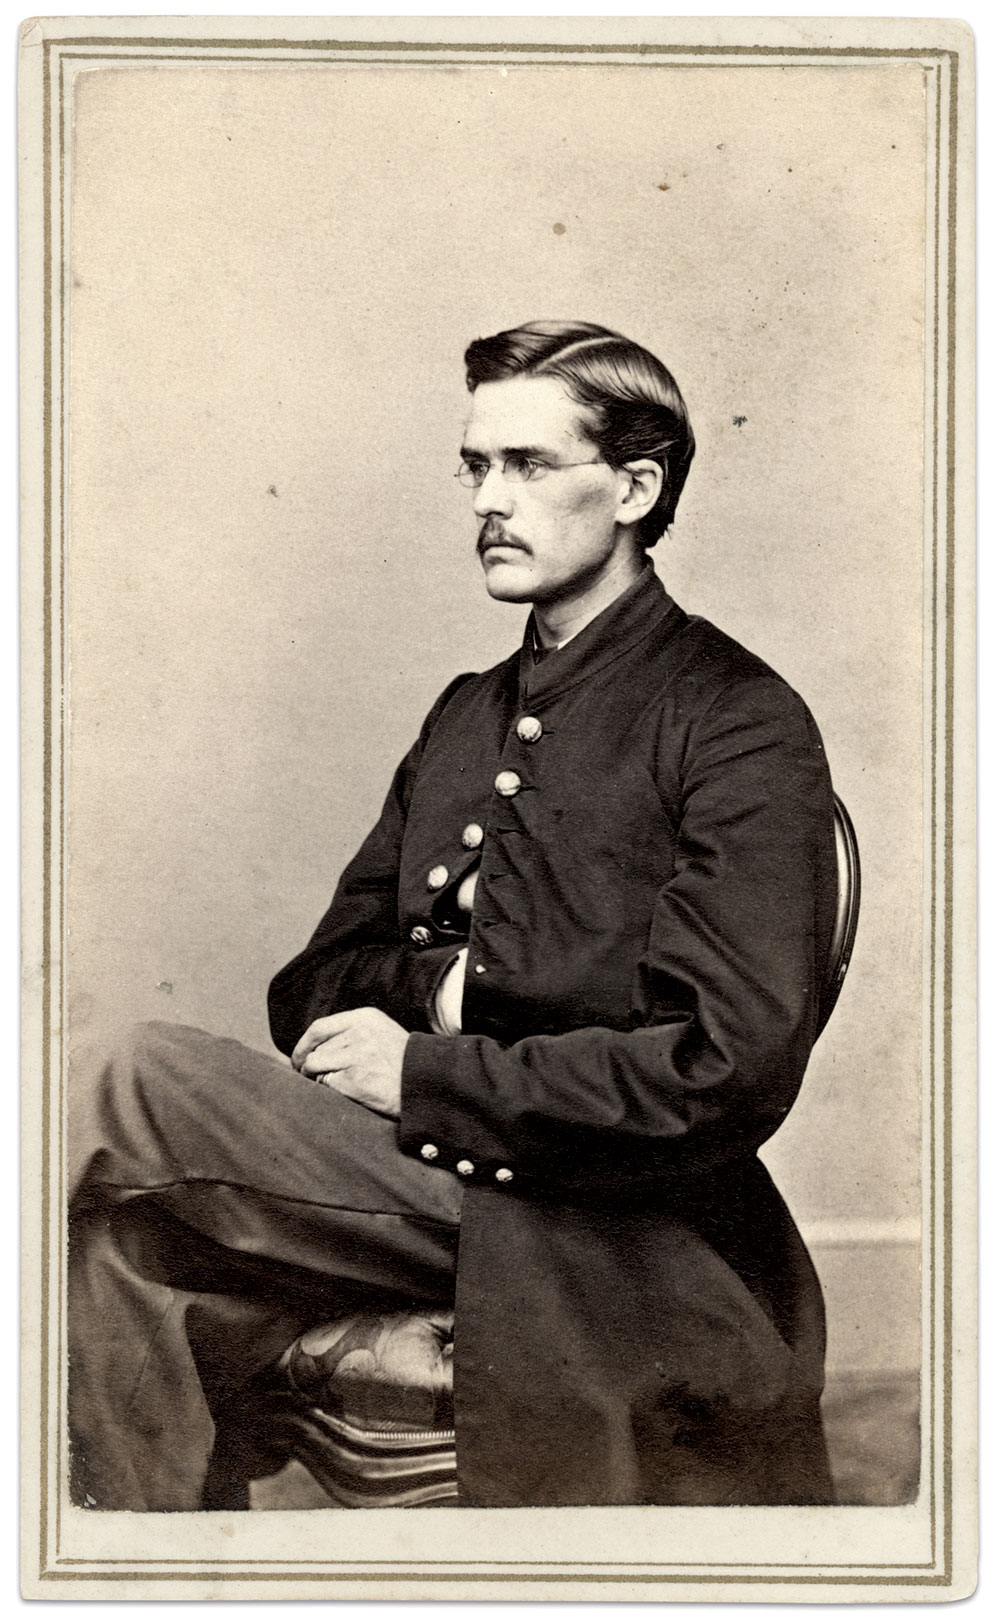 Carte de visite by George B. Billings  and Albyron E. Hough of Lebanon, N.H. Dave Morin Collection.